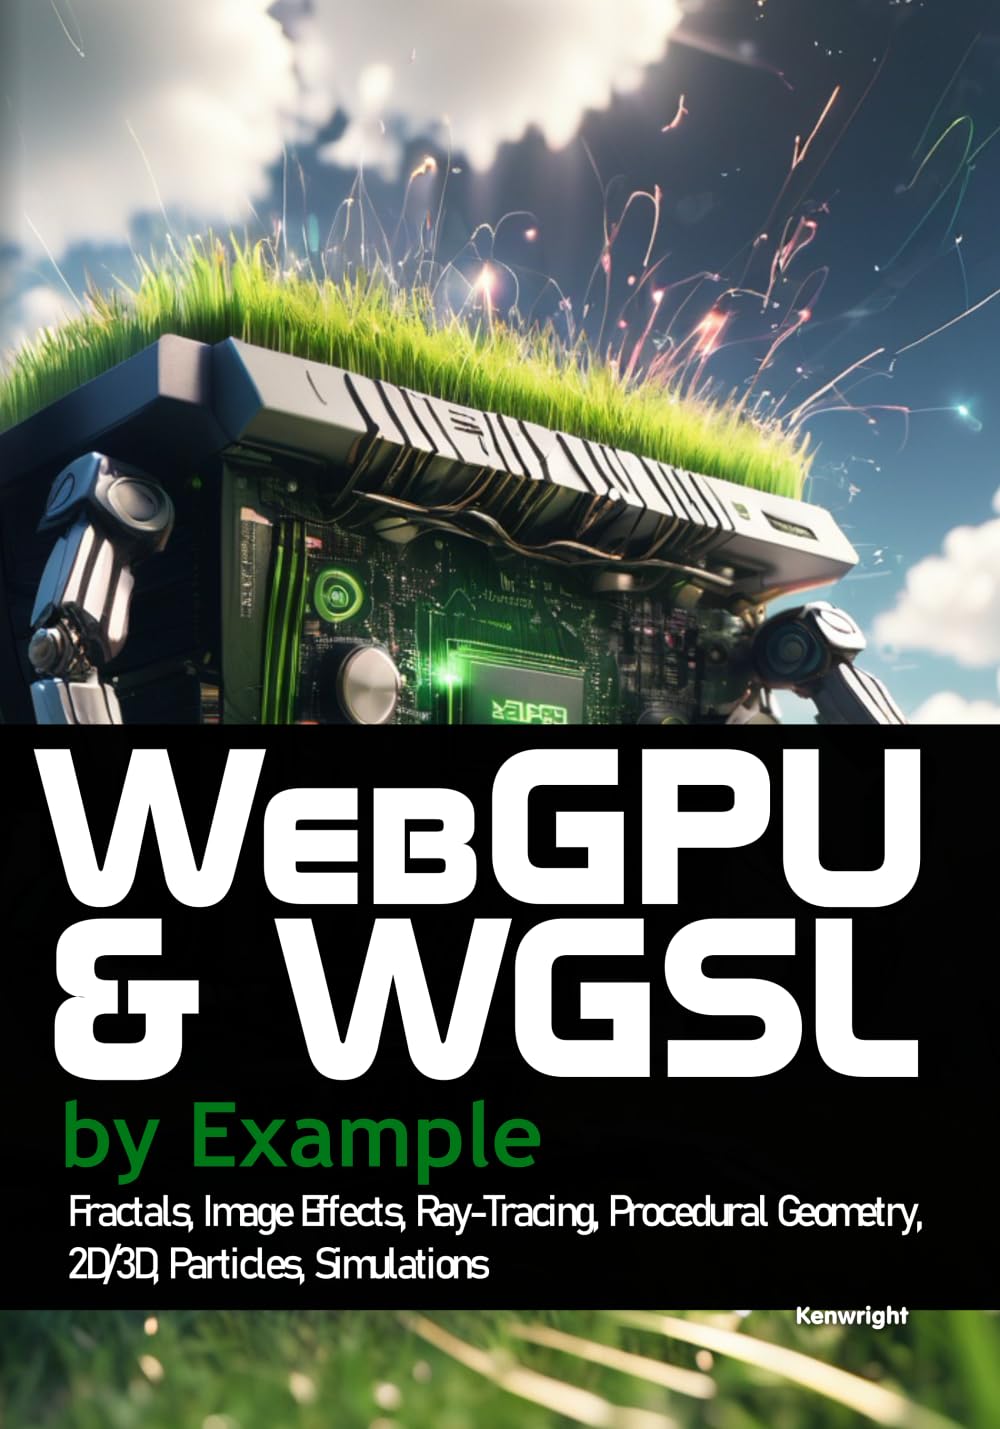 WebGPU and WGSL by Example: Fractals, Image Effects, Ray-Tracing, Procedural Geometry, 2D/3D, Particles, Simulations (Paperback)